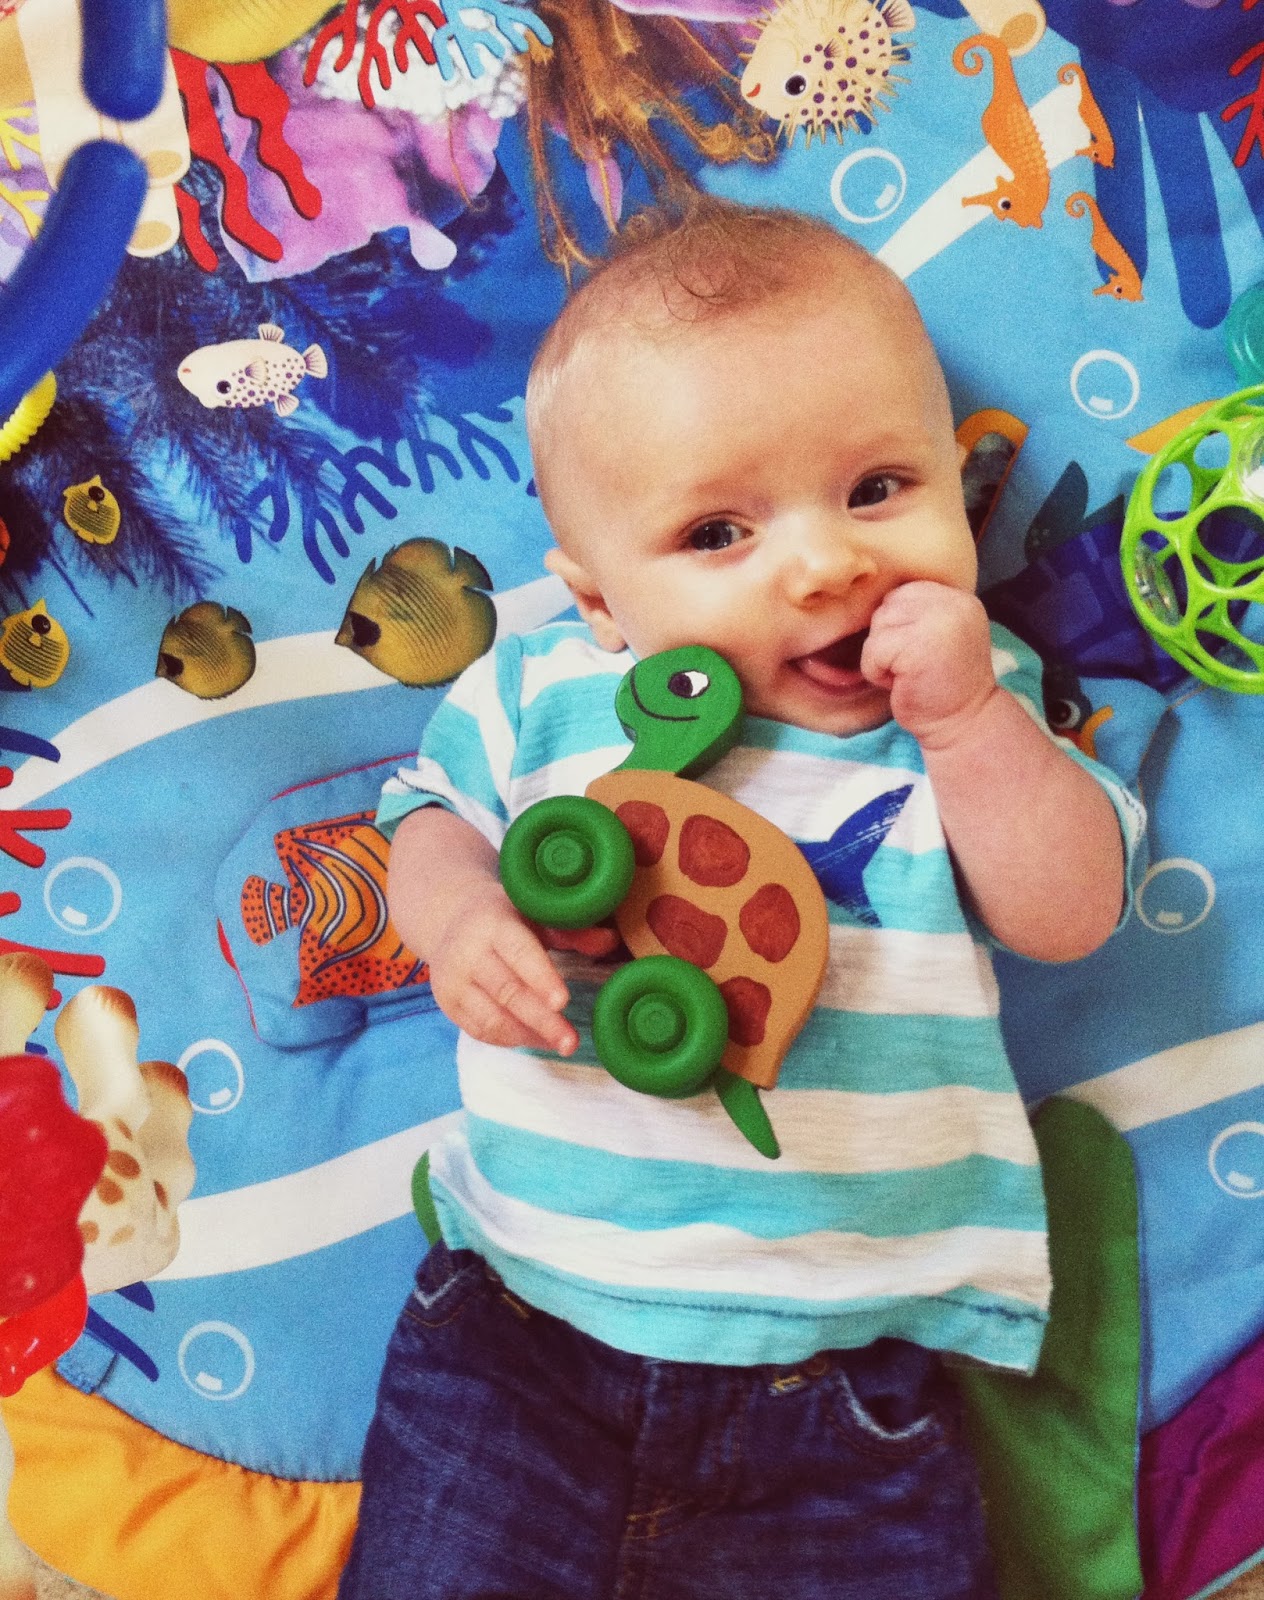 TESSA RAYANNE: Our Picks For Baby Products: Giggle Tree Toys